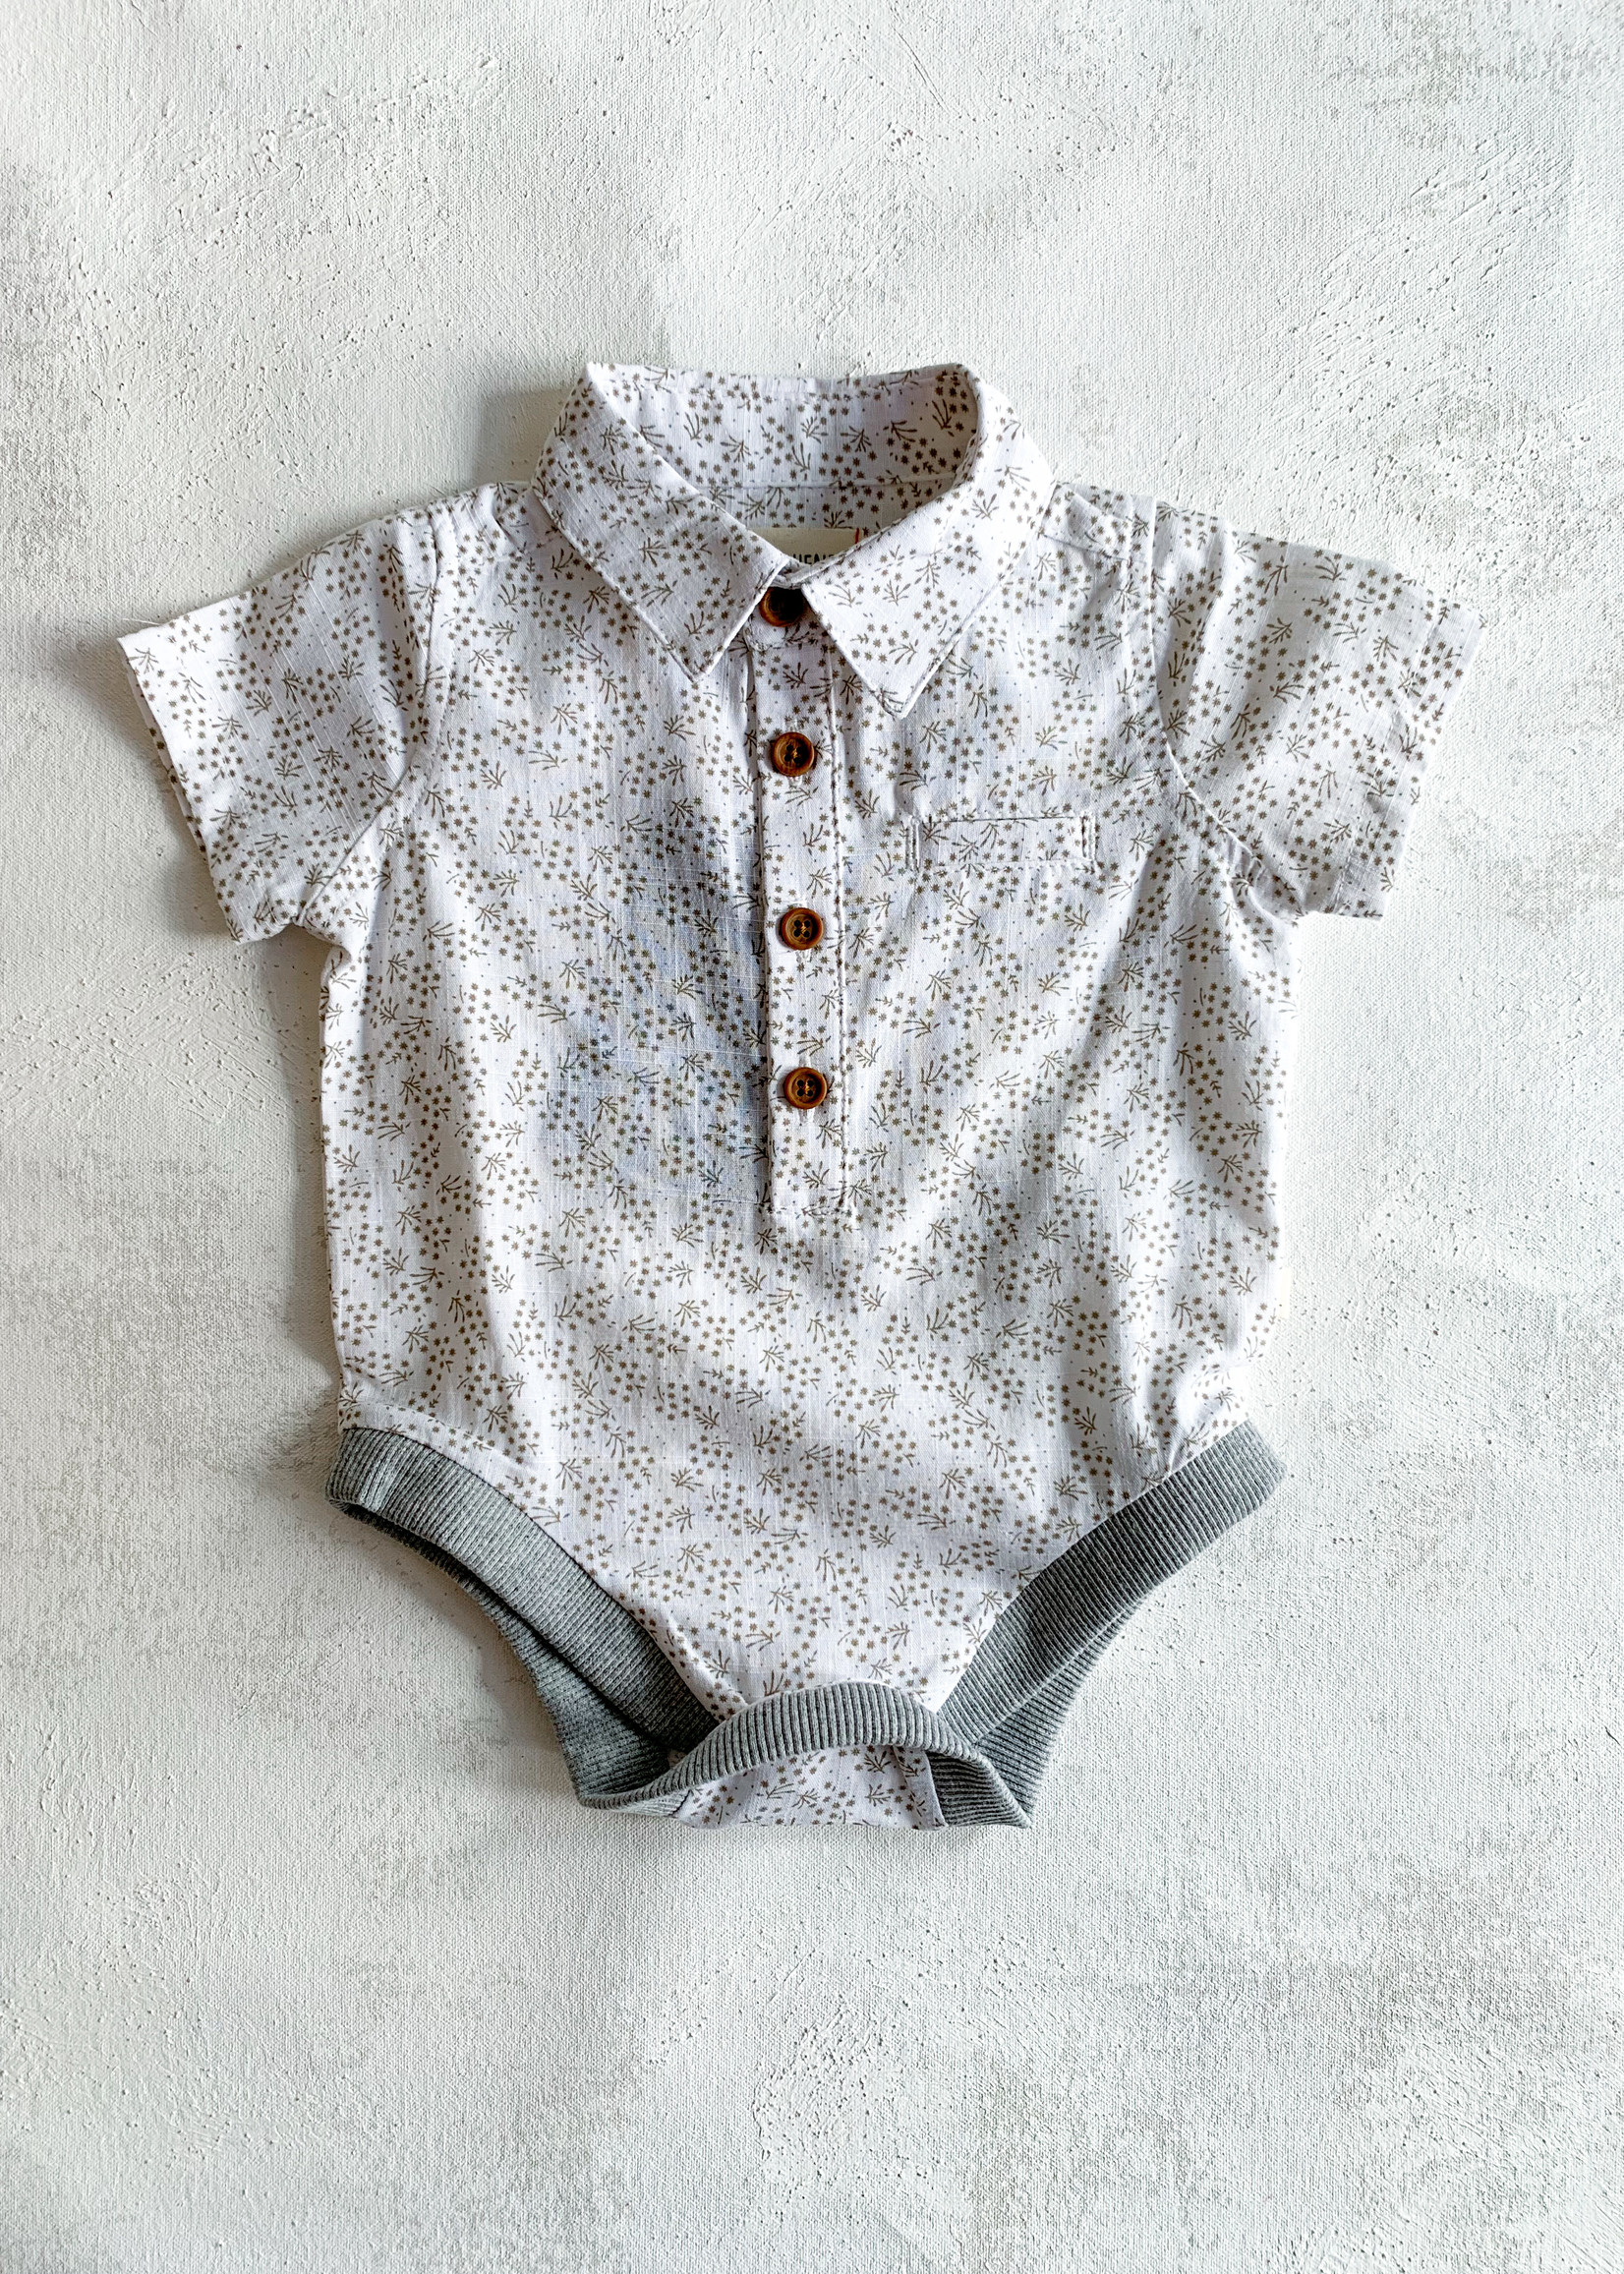 Elitaire Petite Newport Onesie & Shirt in Taupe Floral